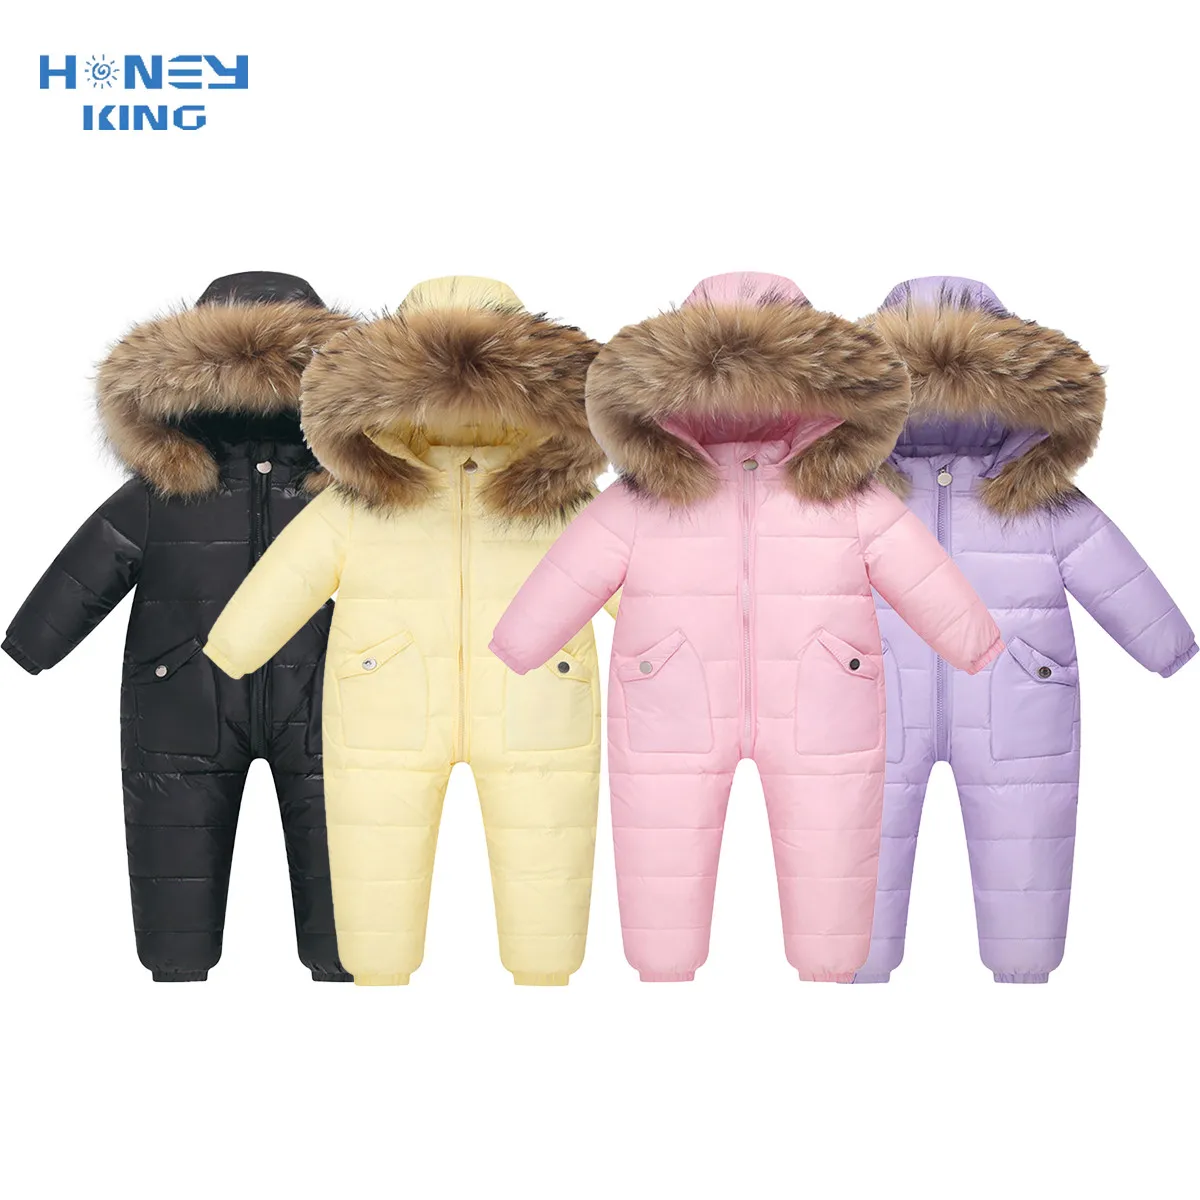 Winter Baby Rompers Thicken Warm Snowsuits For Kids Bodysuit Hooded Overalls Windproof Ski Suits Children One-Pieces Clothing